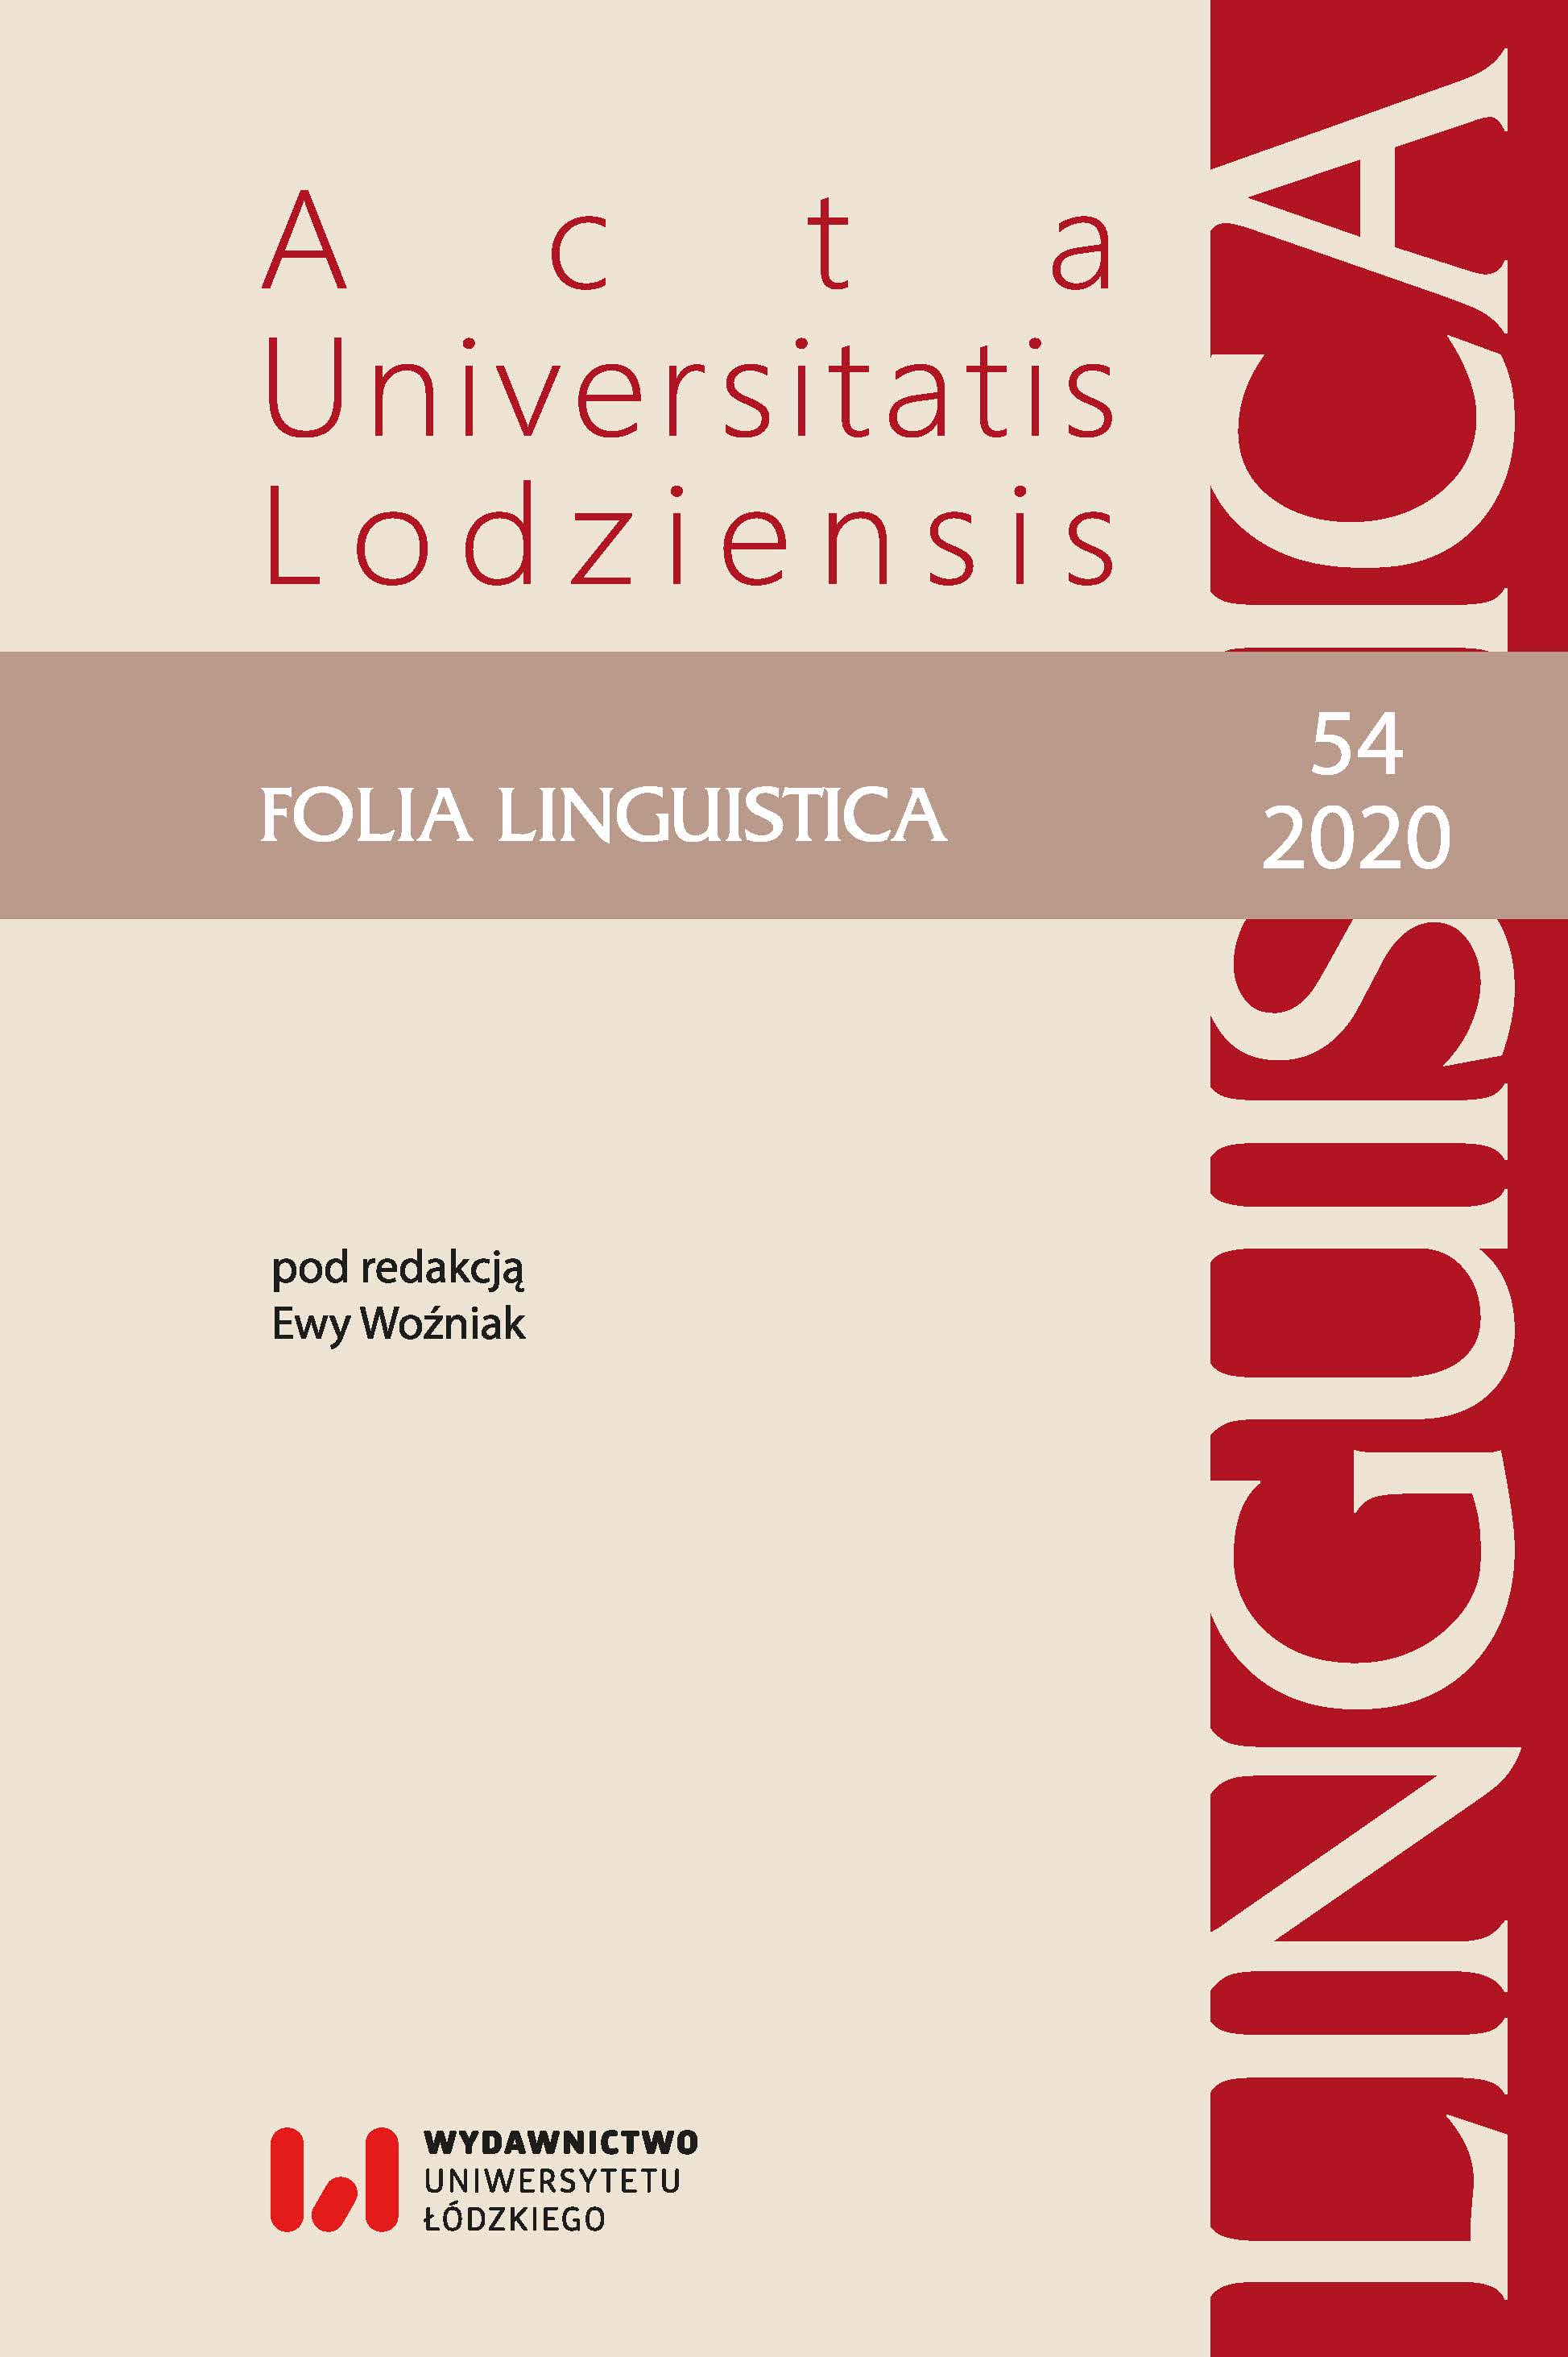 The axiological basis of the sender’s language behaviour in the preface to the work popularizing knowledge about the Polish language in the XIX century Cover Image